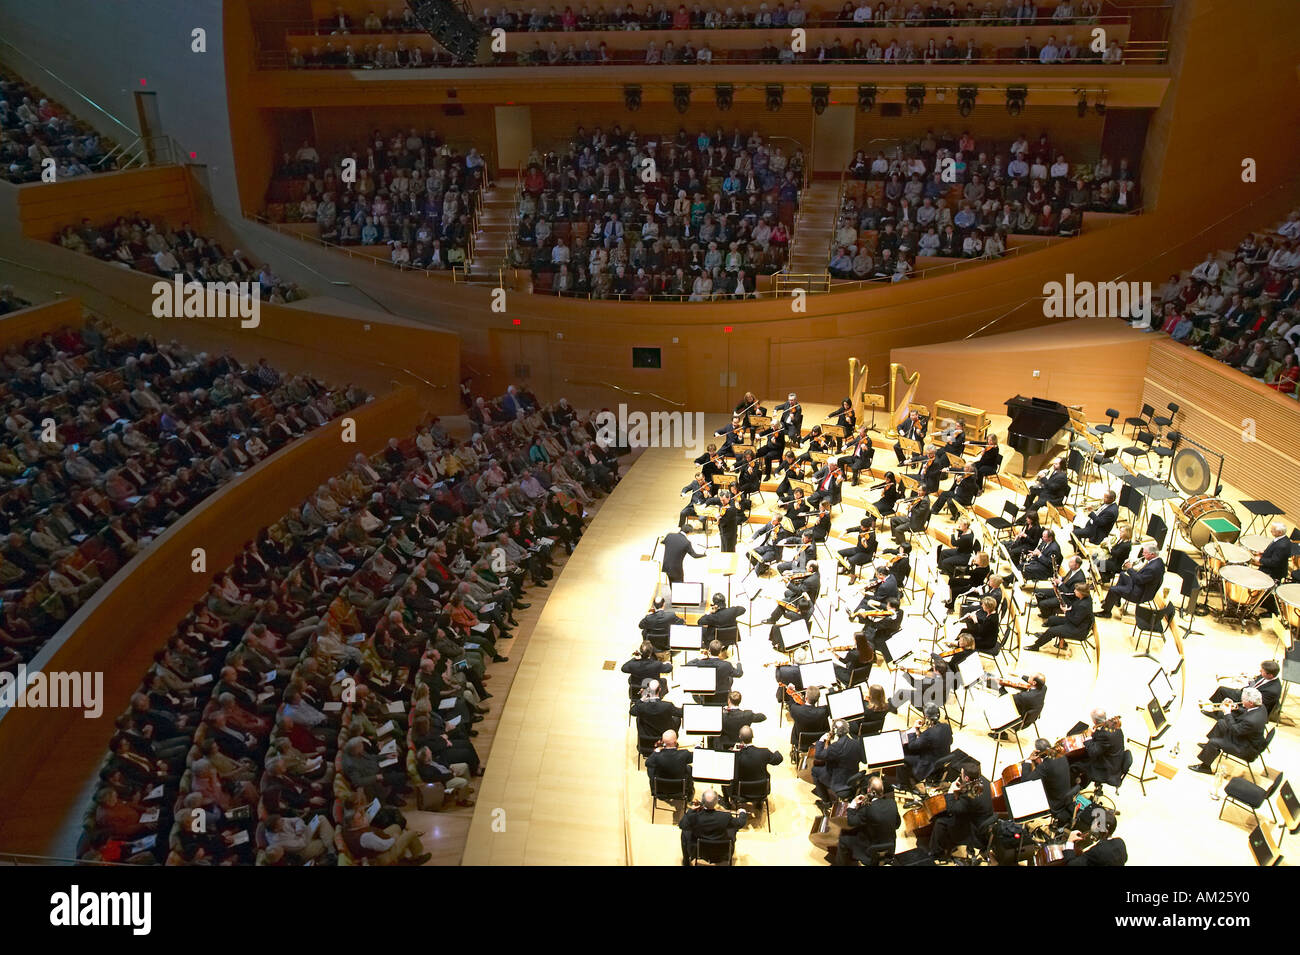 The Los Angeles Philharmonic orchestra performing at the new Disney Concert Hall designed by Frank Gehry Stock Photo